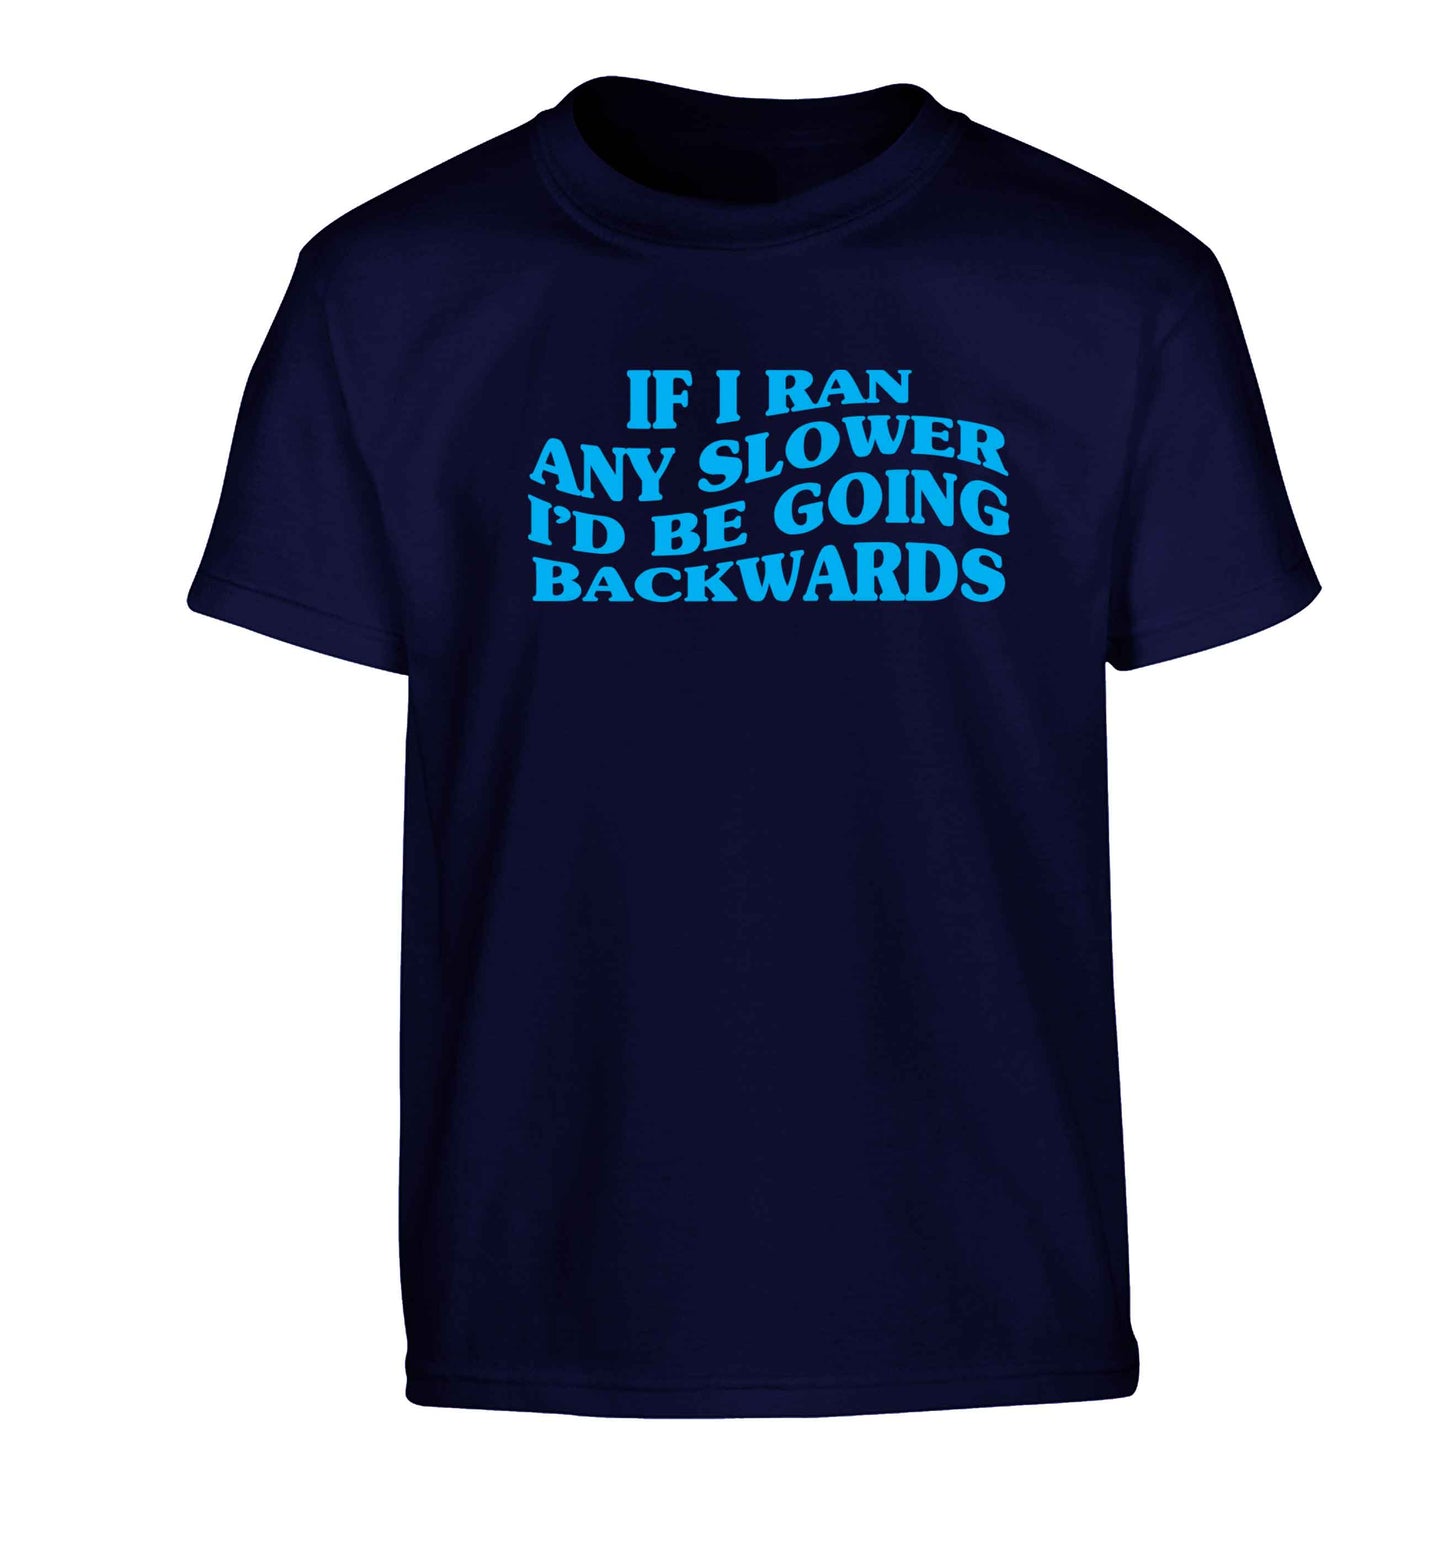 If I ran any slower I'd be going backwards Children's navy Tshirt 12-13 Years